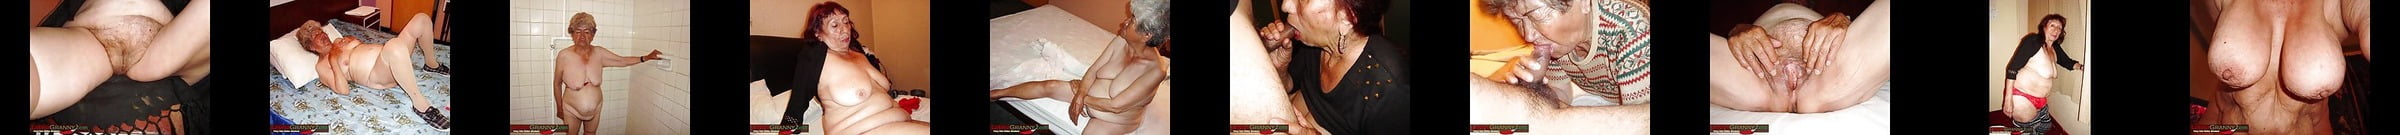 Hellogranny Collecting Latinas For Long Time Free Porn 80